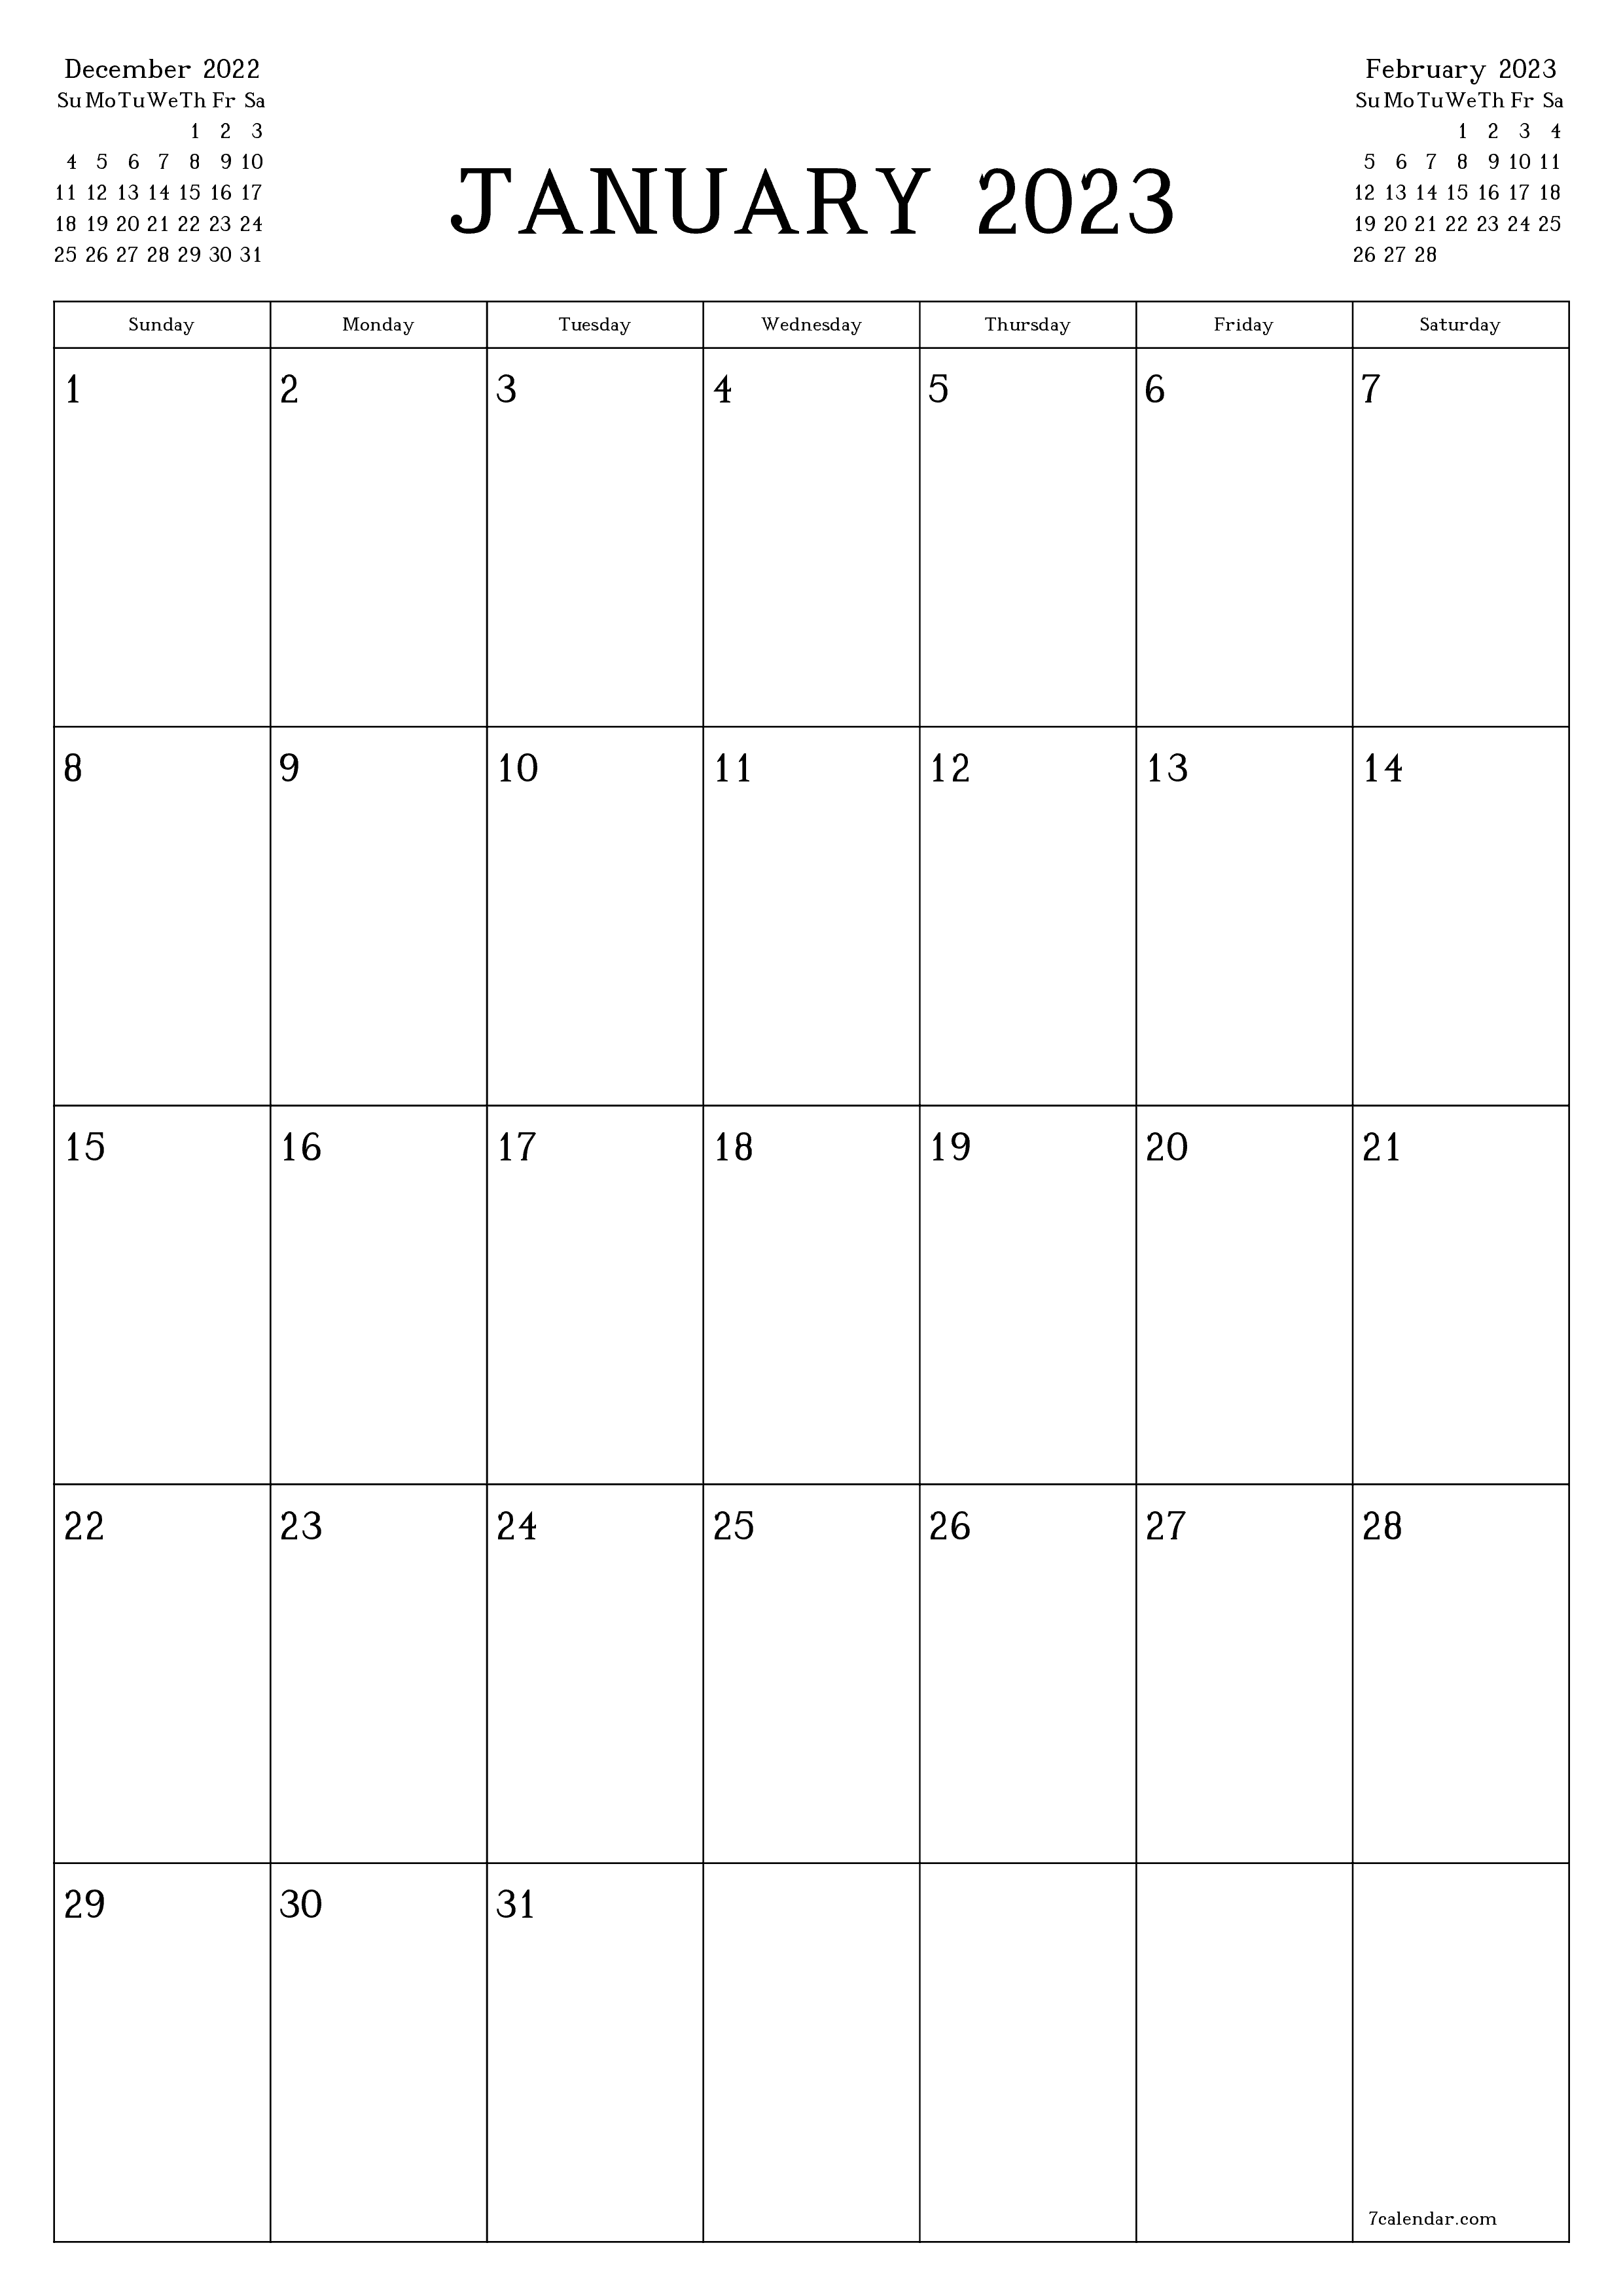 Blank monthly printable calendar and planner for month January 2023 with notes save and print to PDF PNG English - 7calendar.com